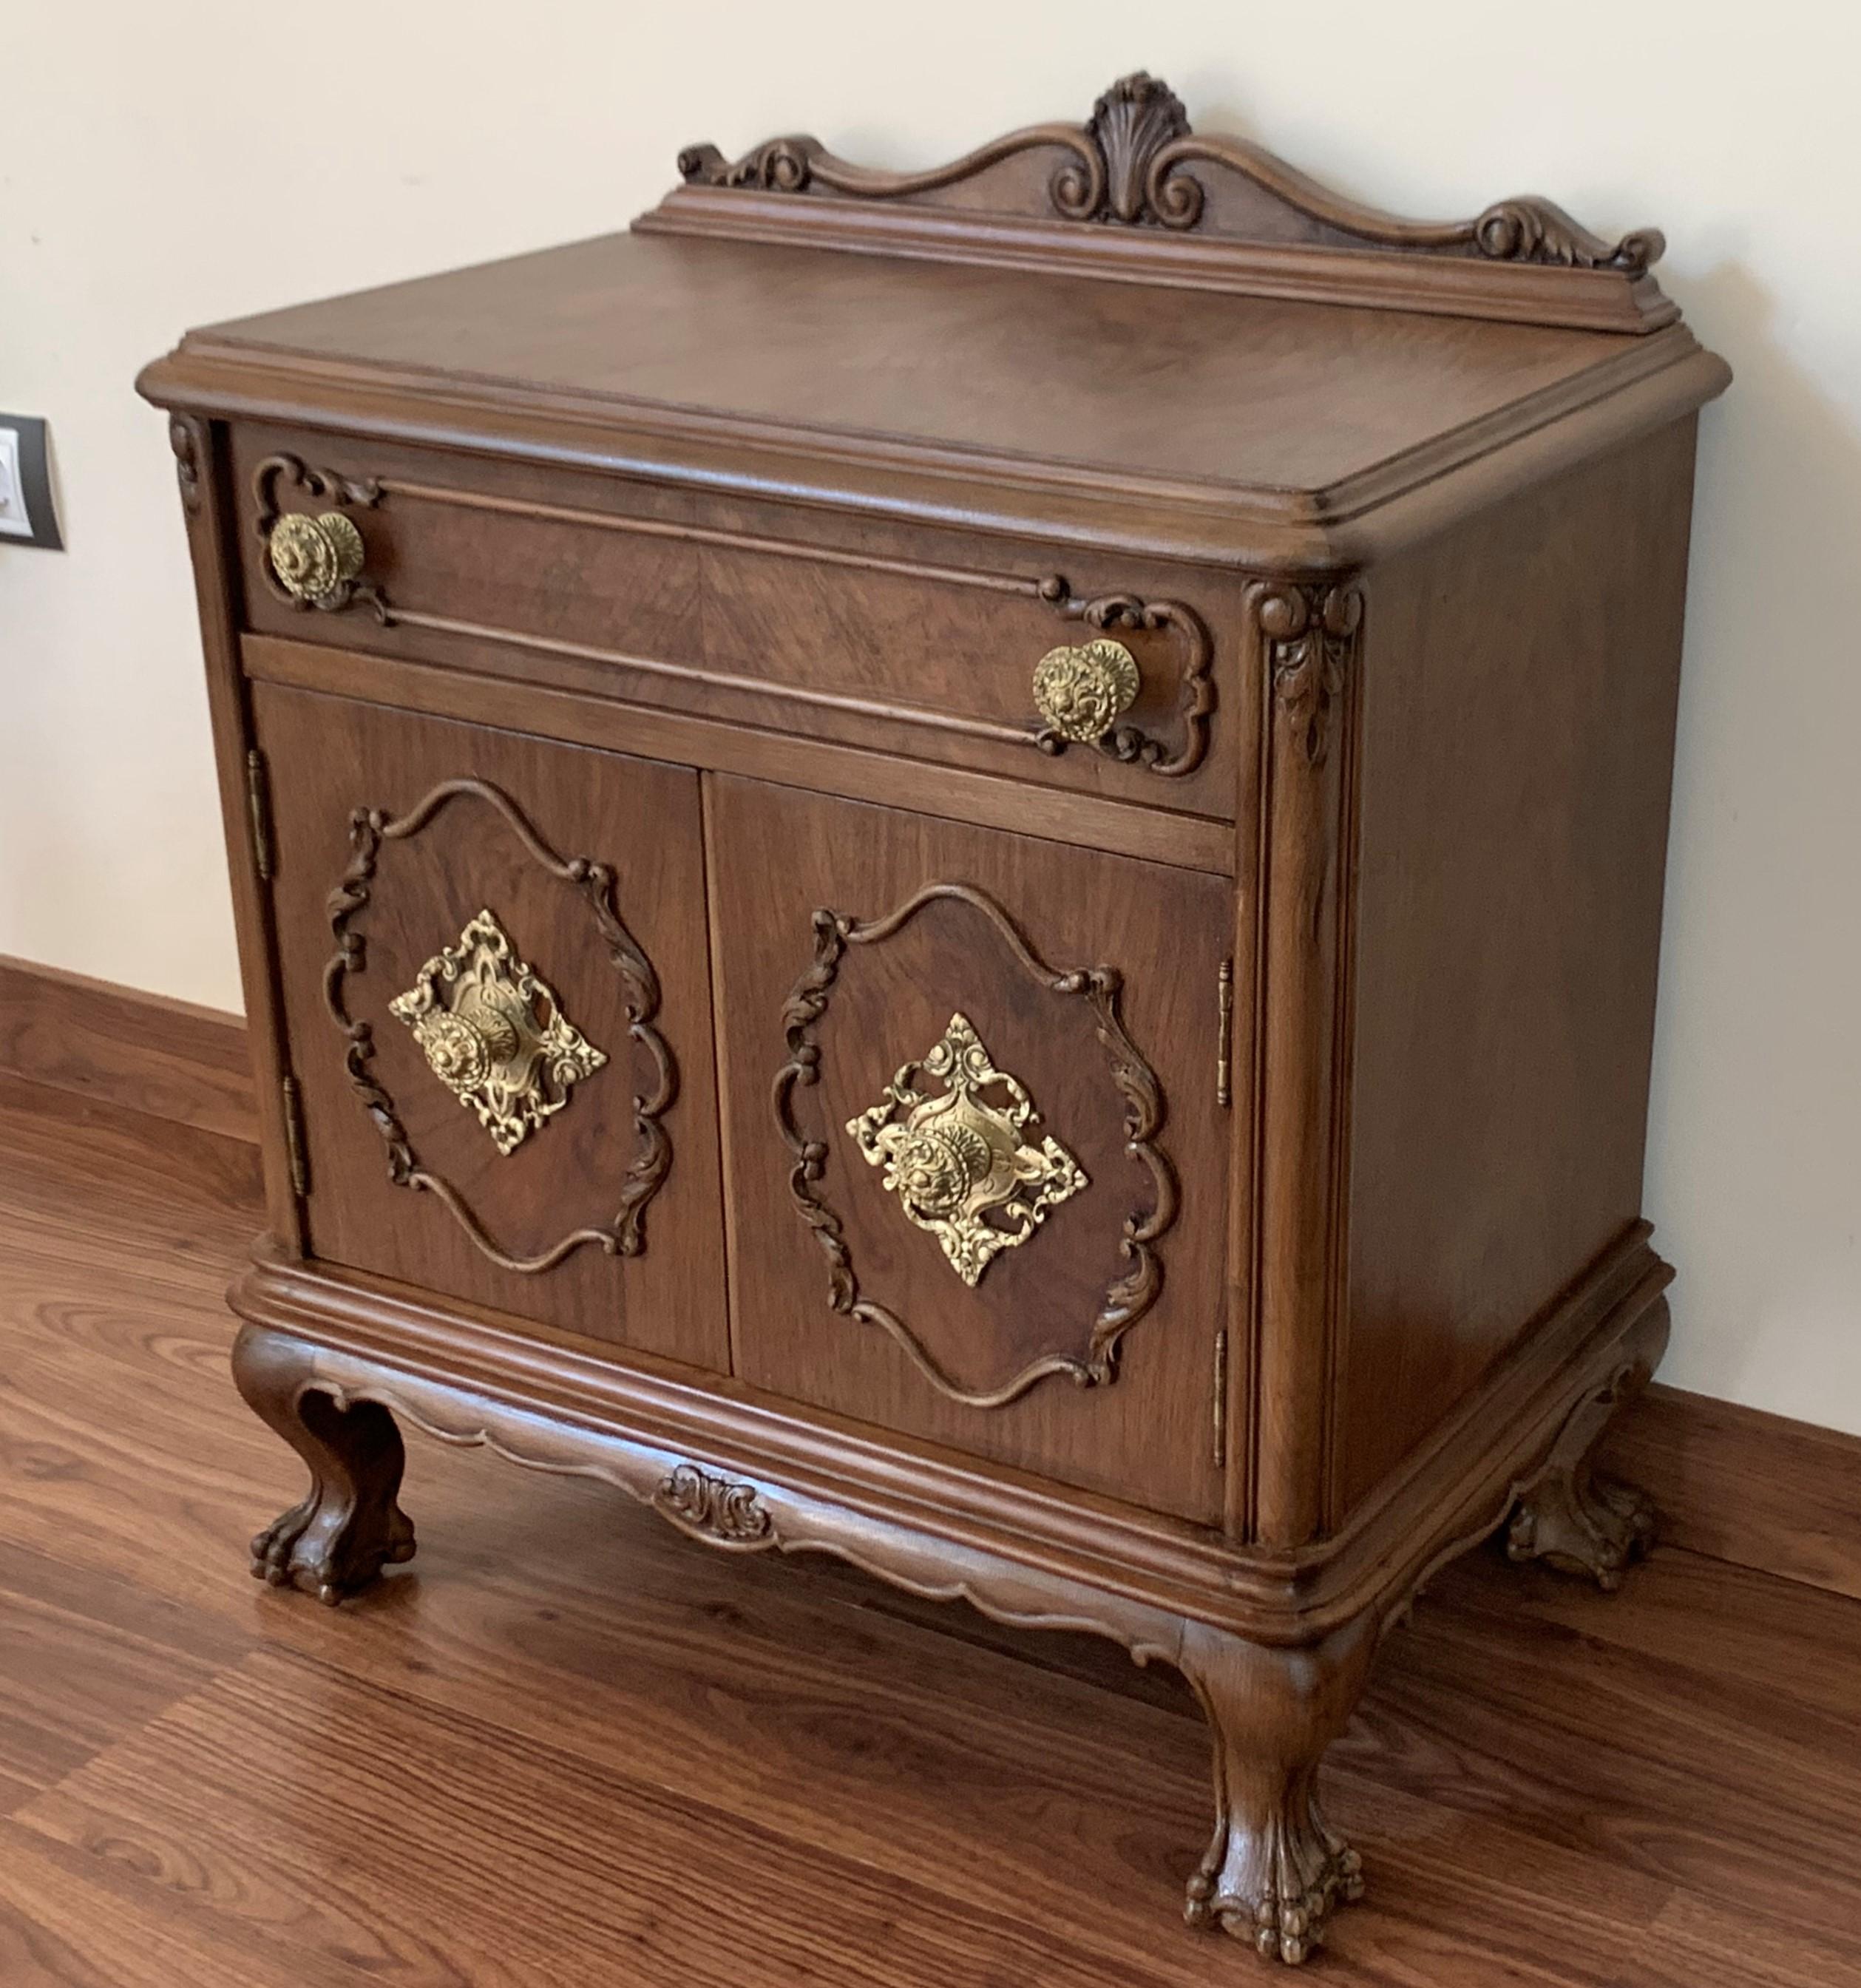 Pair of Baroque style bedside tables from the mid-20th century. Nicely carved furniture in walnut with removable backsplashes. Nightstands with a drawer and two front doors, of good capacity. Furniture adorned with original bronze hardware. Ideal